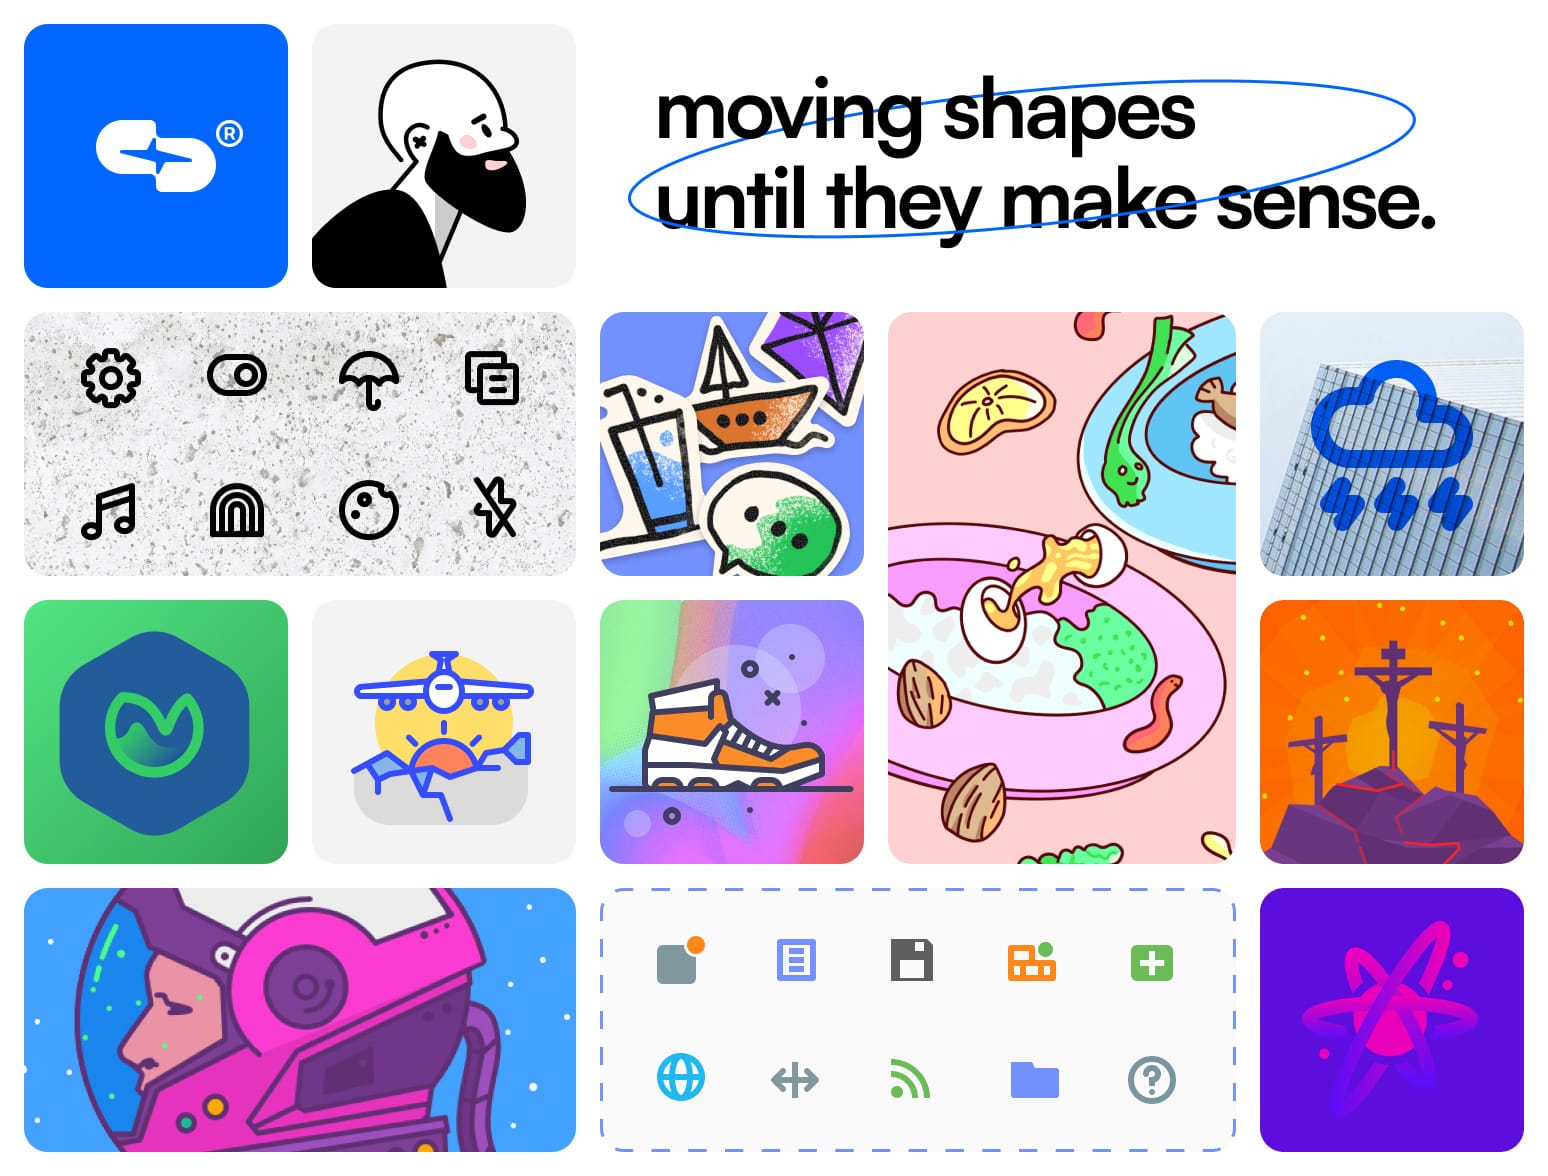 A vibrant collage of various icons and images including a man's face, artistic illustrations of food, technological symbols, and quirky designs, accompanied by the phrase “moving shapes until they make sense”